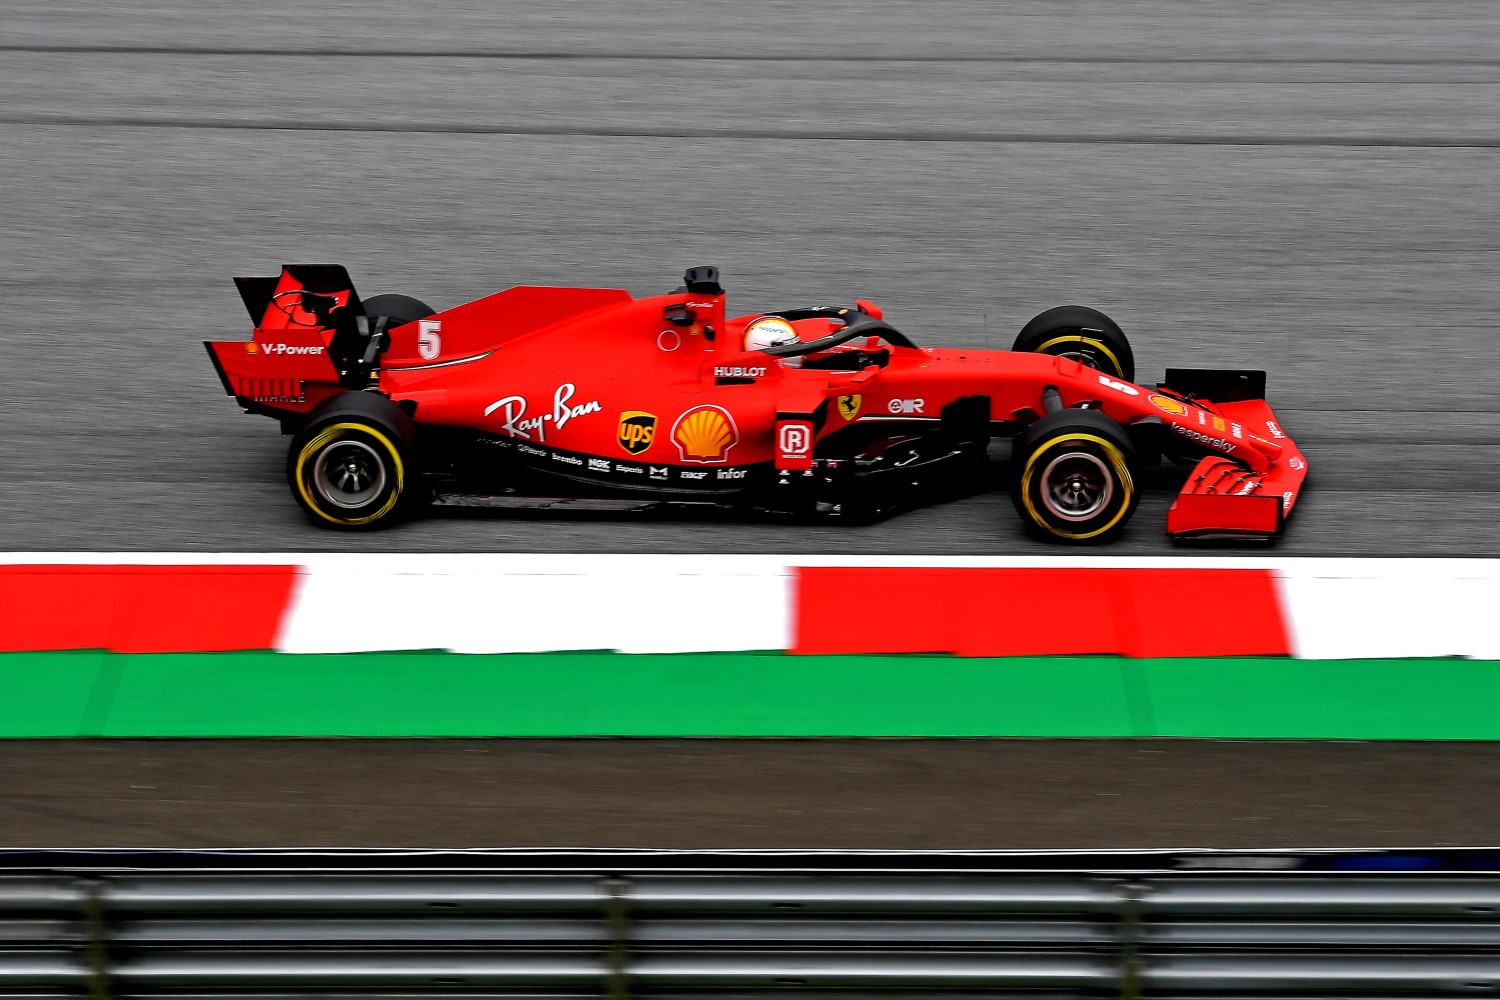 Vettel's mental mistake yet again Sunday in Austria underscores why he will be changing baby diapers in 2021 and not driving an F1 car